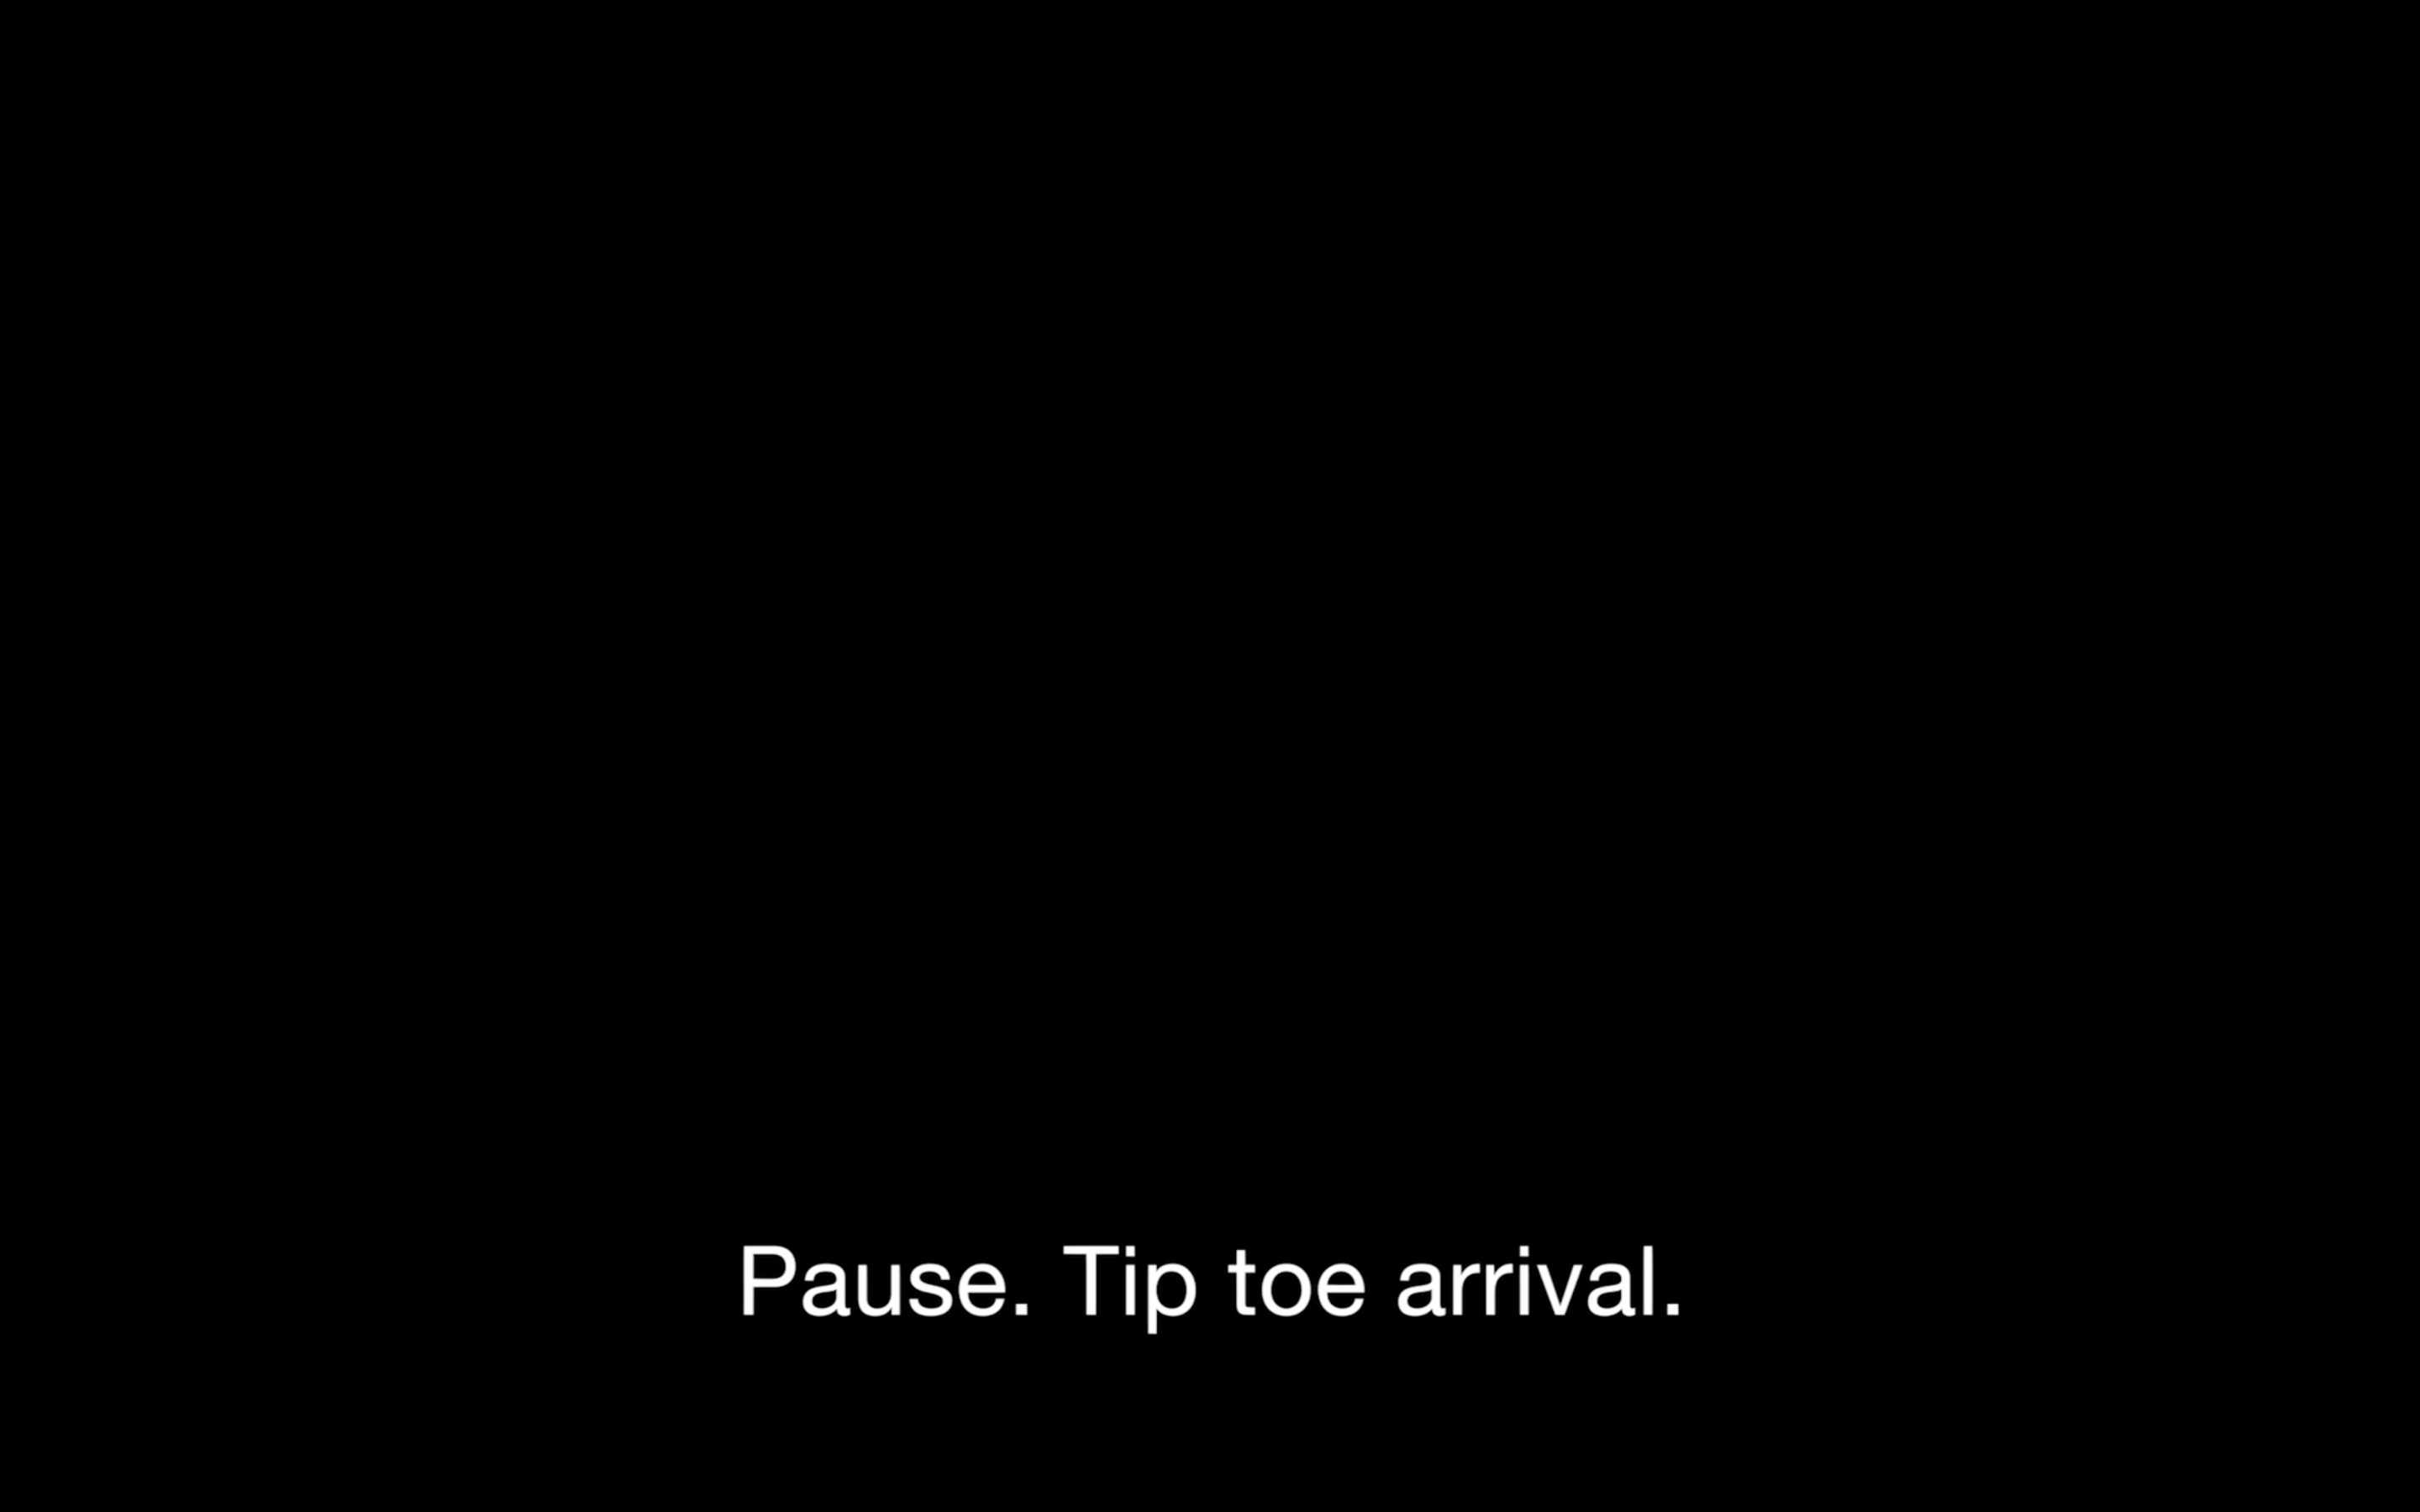 A pitch black background. Centered in the bottom third of the image are white captions that read, "Pause. Tip toe arrival".